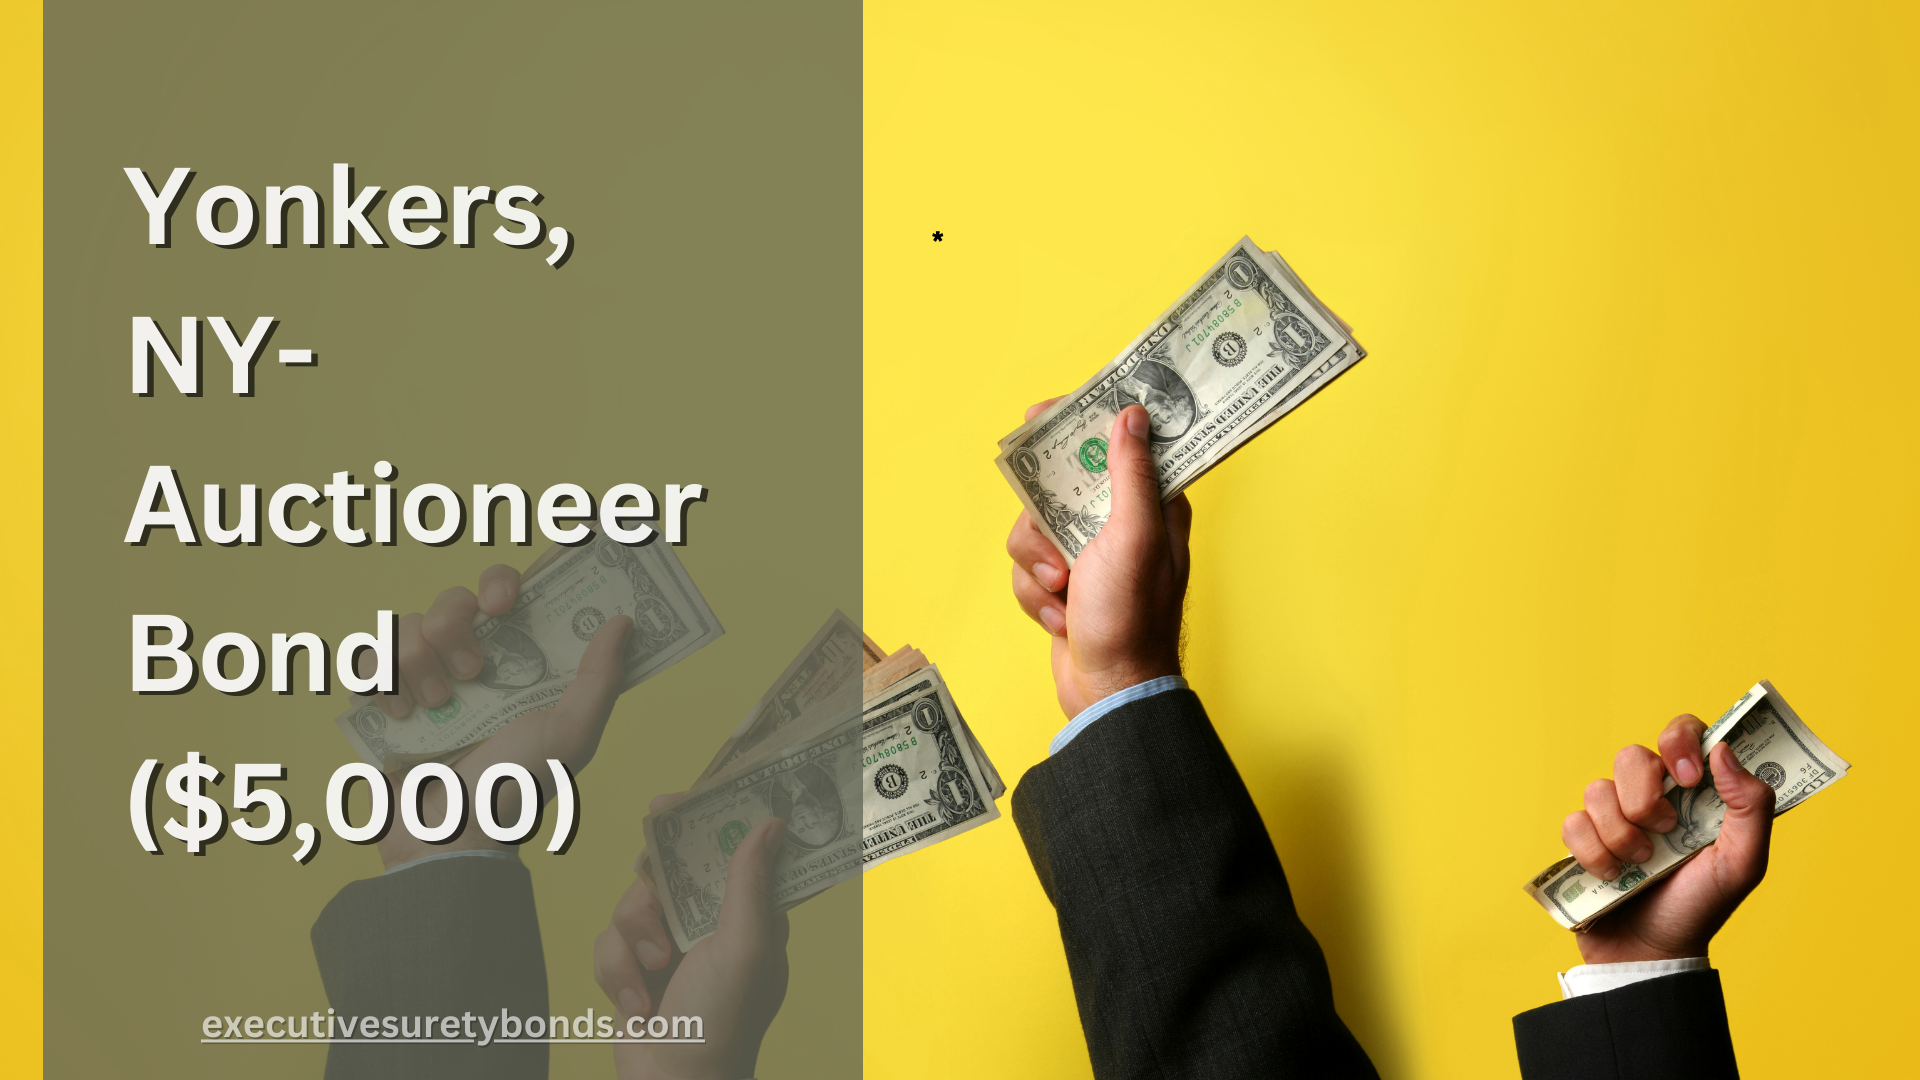 Yonkers, NY-Auctioneer Bond ($5,000)